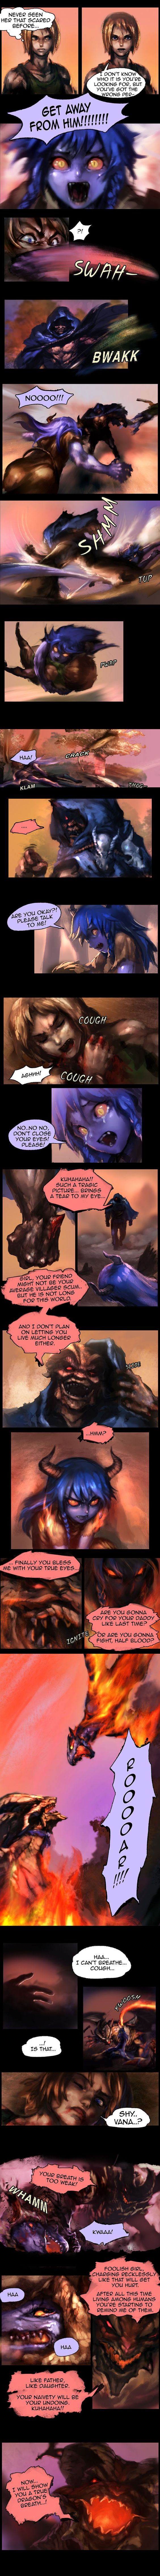 Shyvana~ The Half Dragon Tale. Page 5/6 by ptcrow